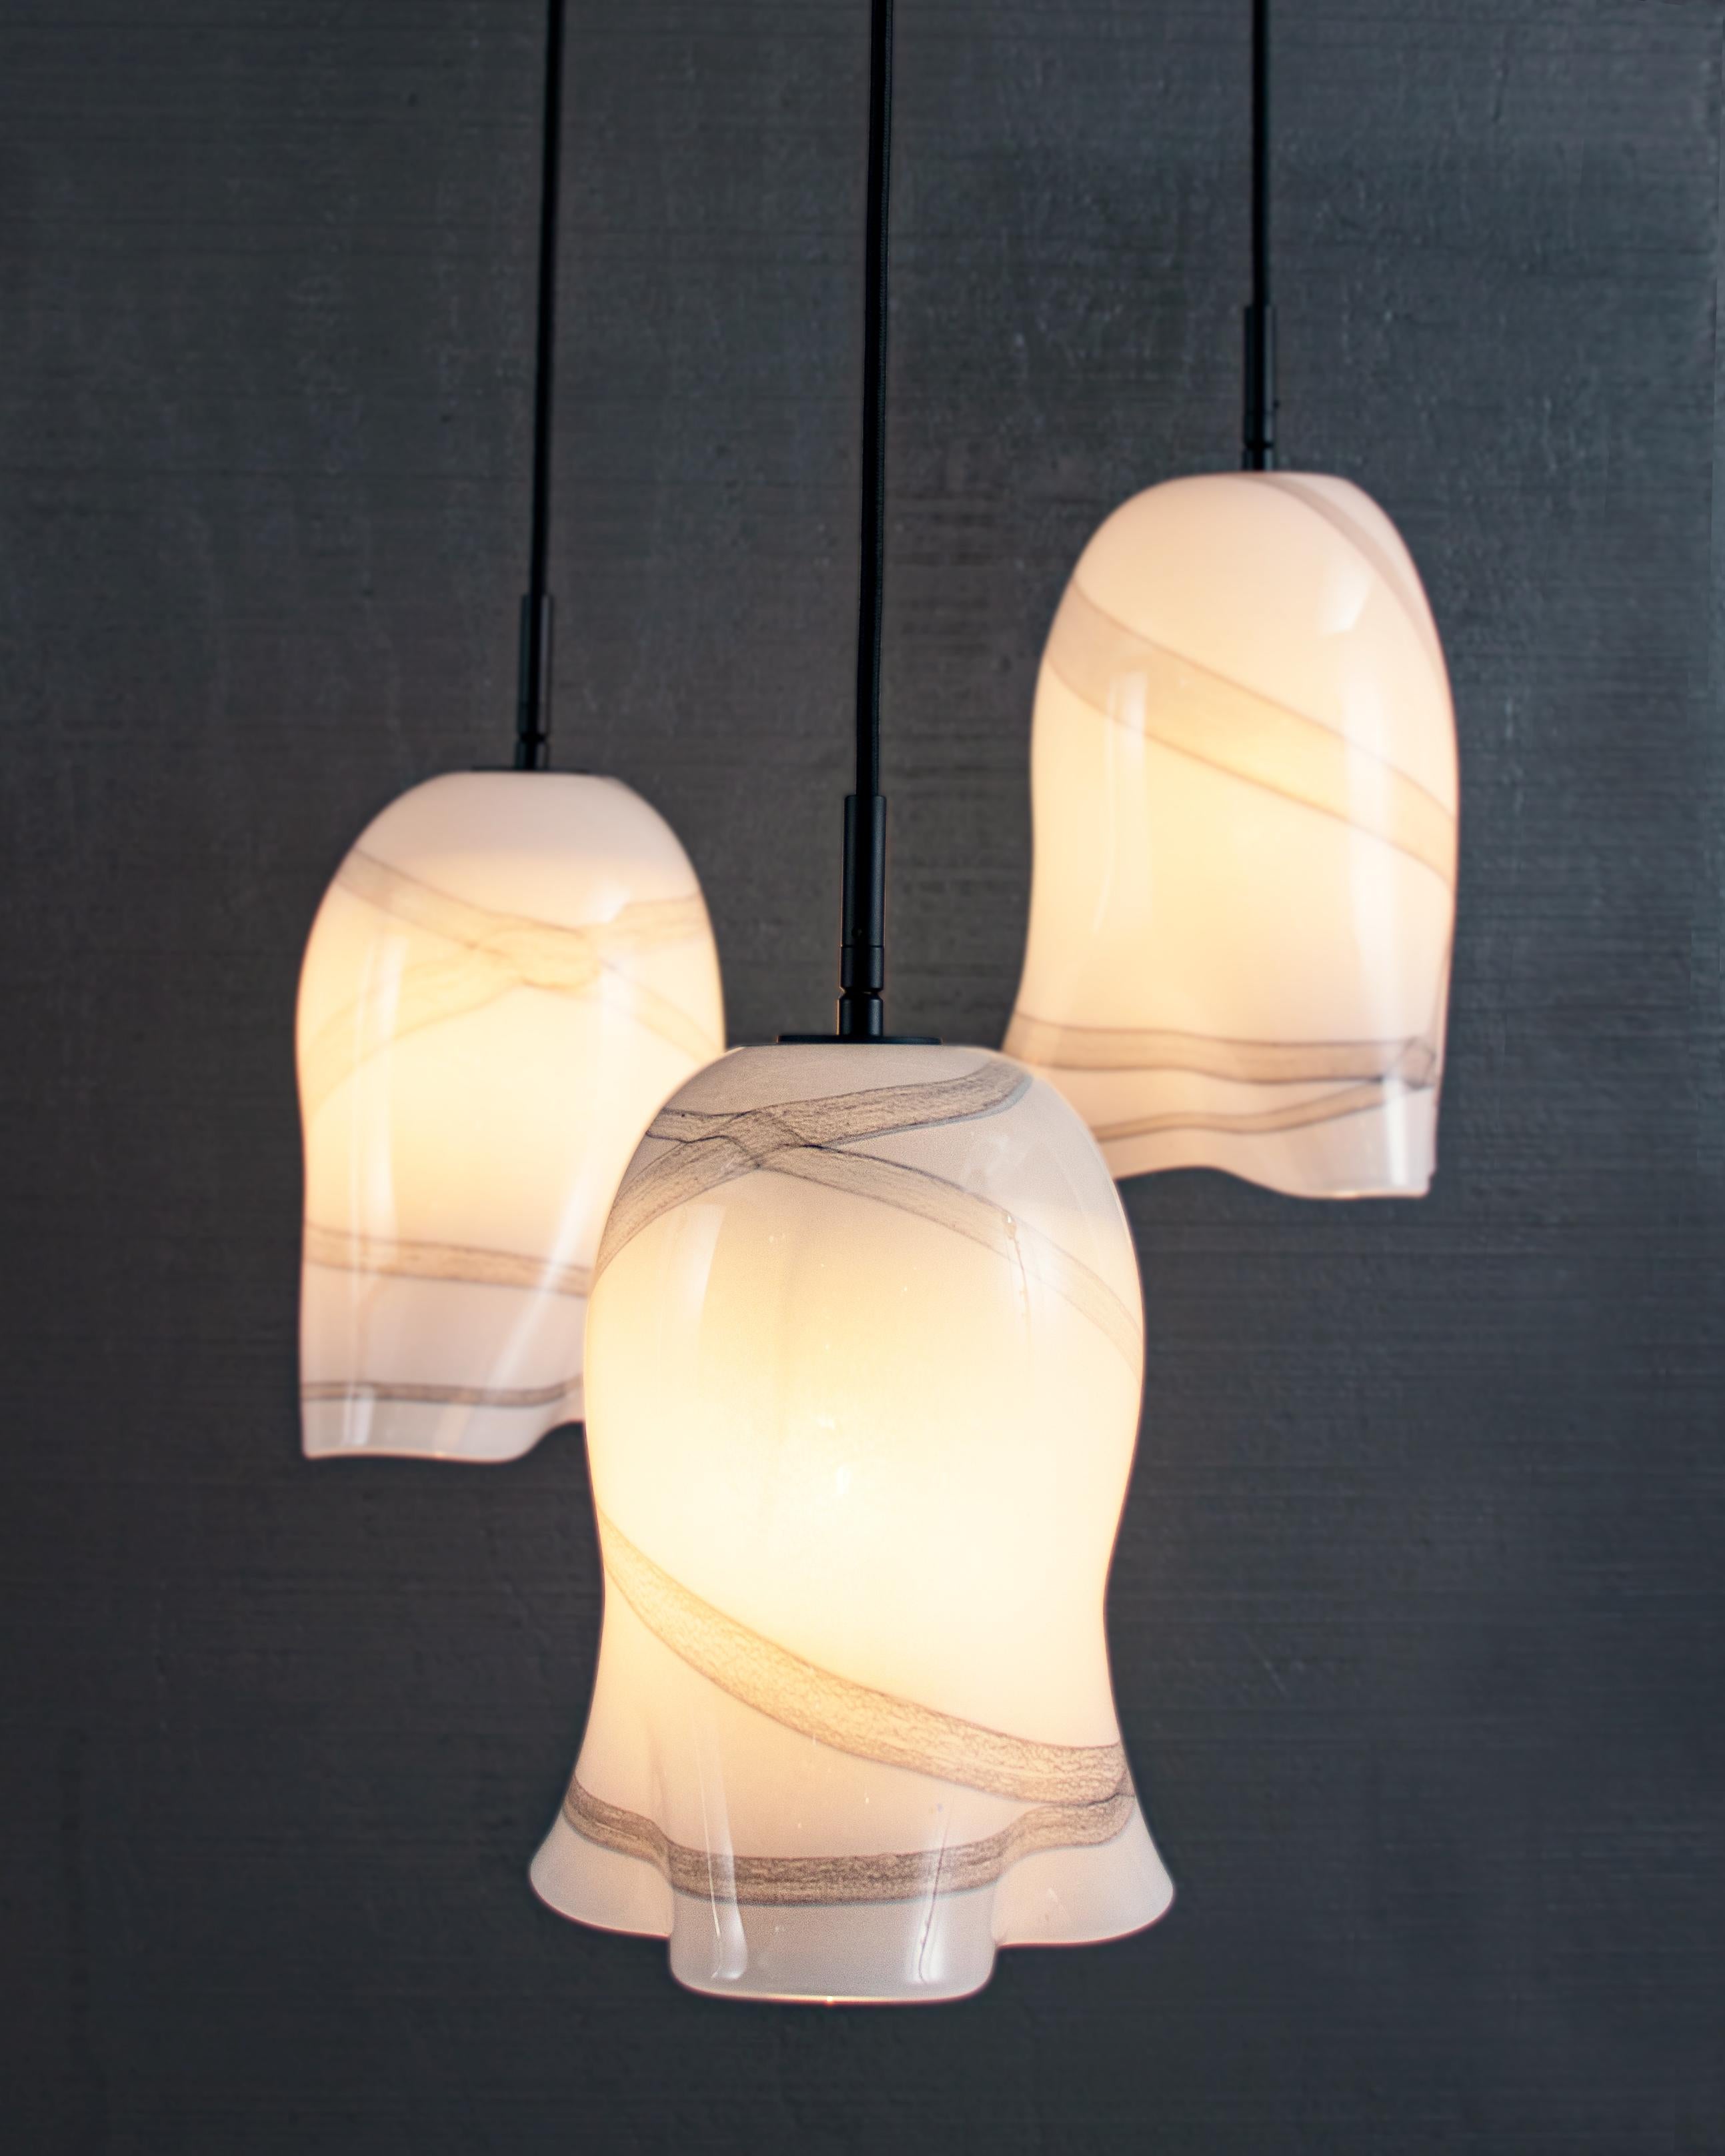 Decorated glass handcrafted lighting feature with artisanal cast.

Bulb 1 medium base 60 Watt incandescent. 5lbs.

The Kama pendant is a mouth blown glass form which celebrates the ageless craft of artisanal glass. Formed in a wooden mould, removed